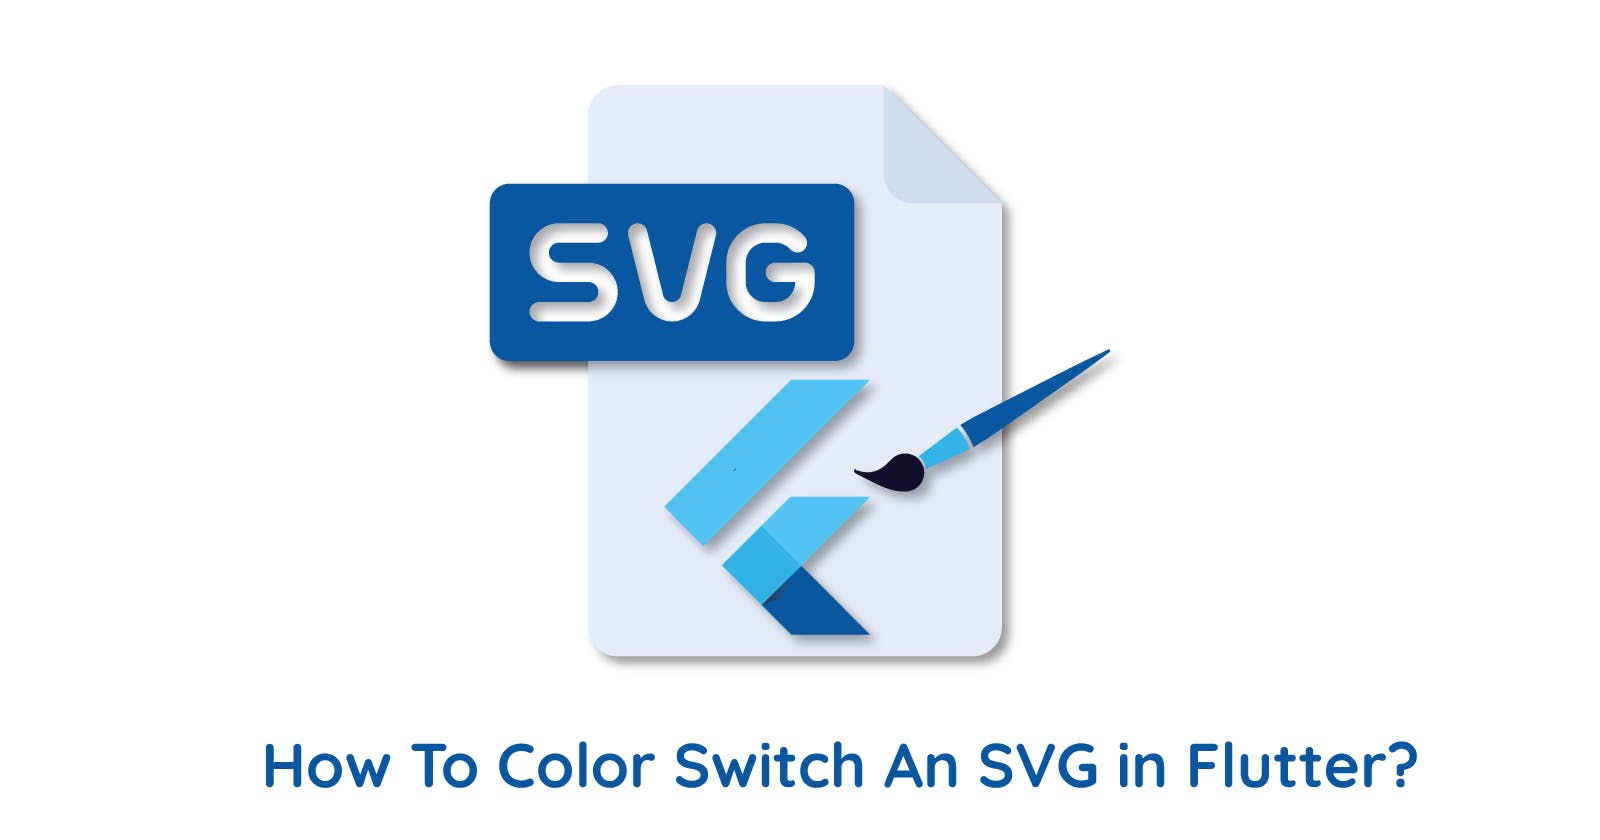 How To Color Switch An SVG in Flutter?